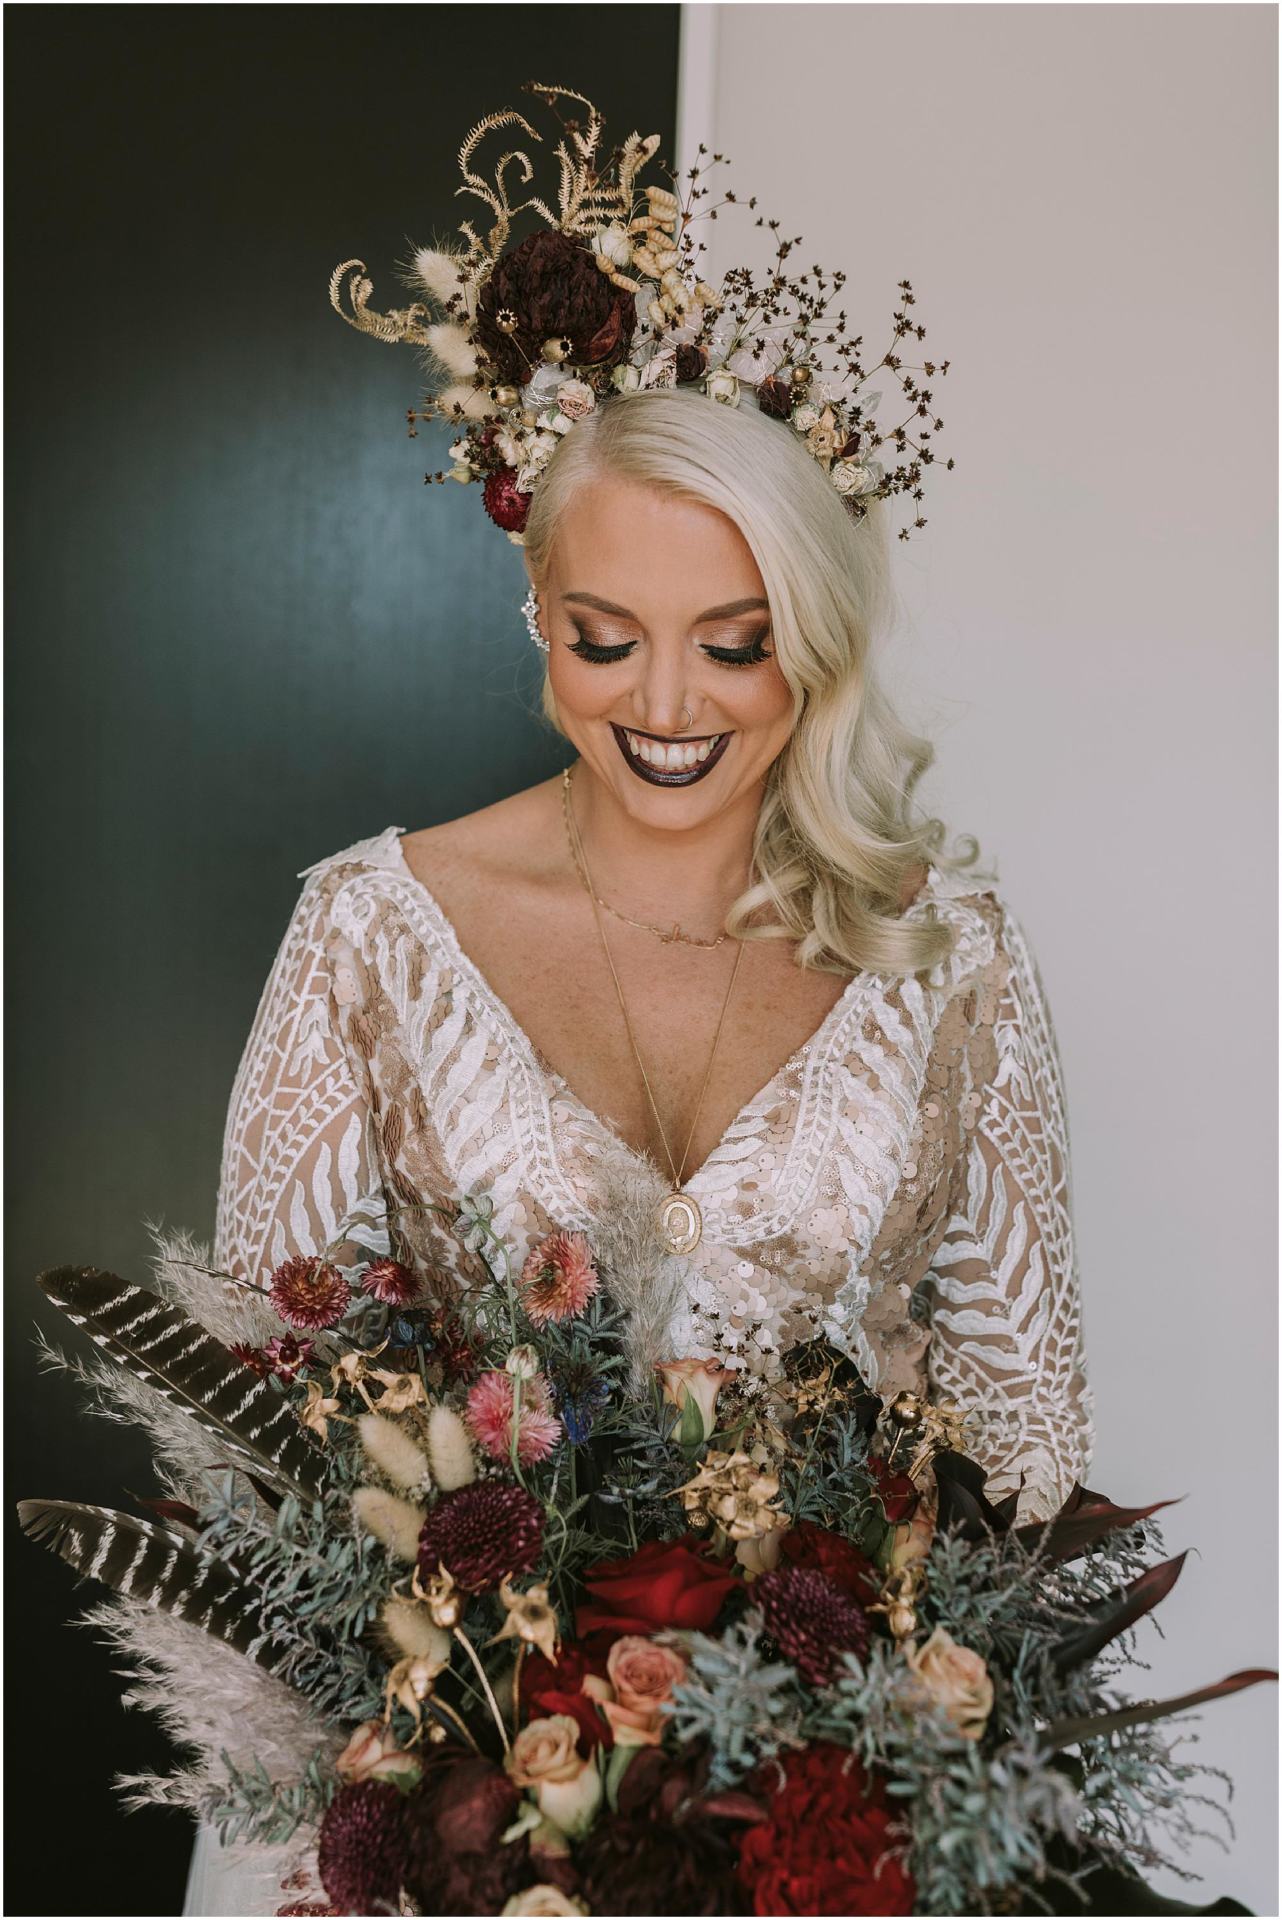 Charlotte Kiri Photography - Wedding Photography with a striking bride wearing a low V-necked dress with champagne-lined lace and holding a rustic bunch of roses and feathers and toi toi, with a stunning floral tiara with sculpted foliage